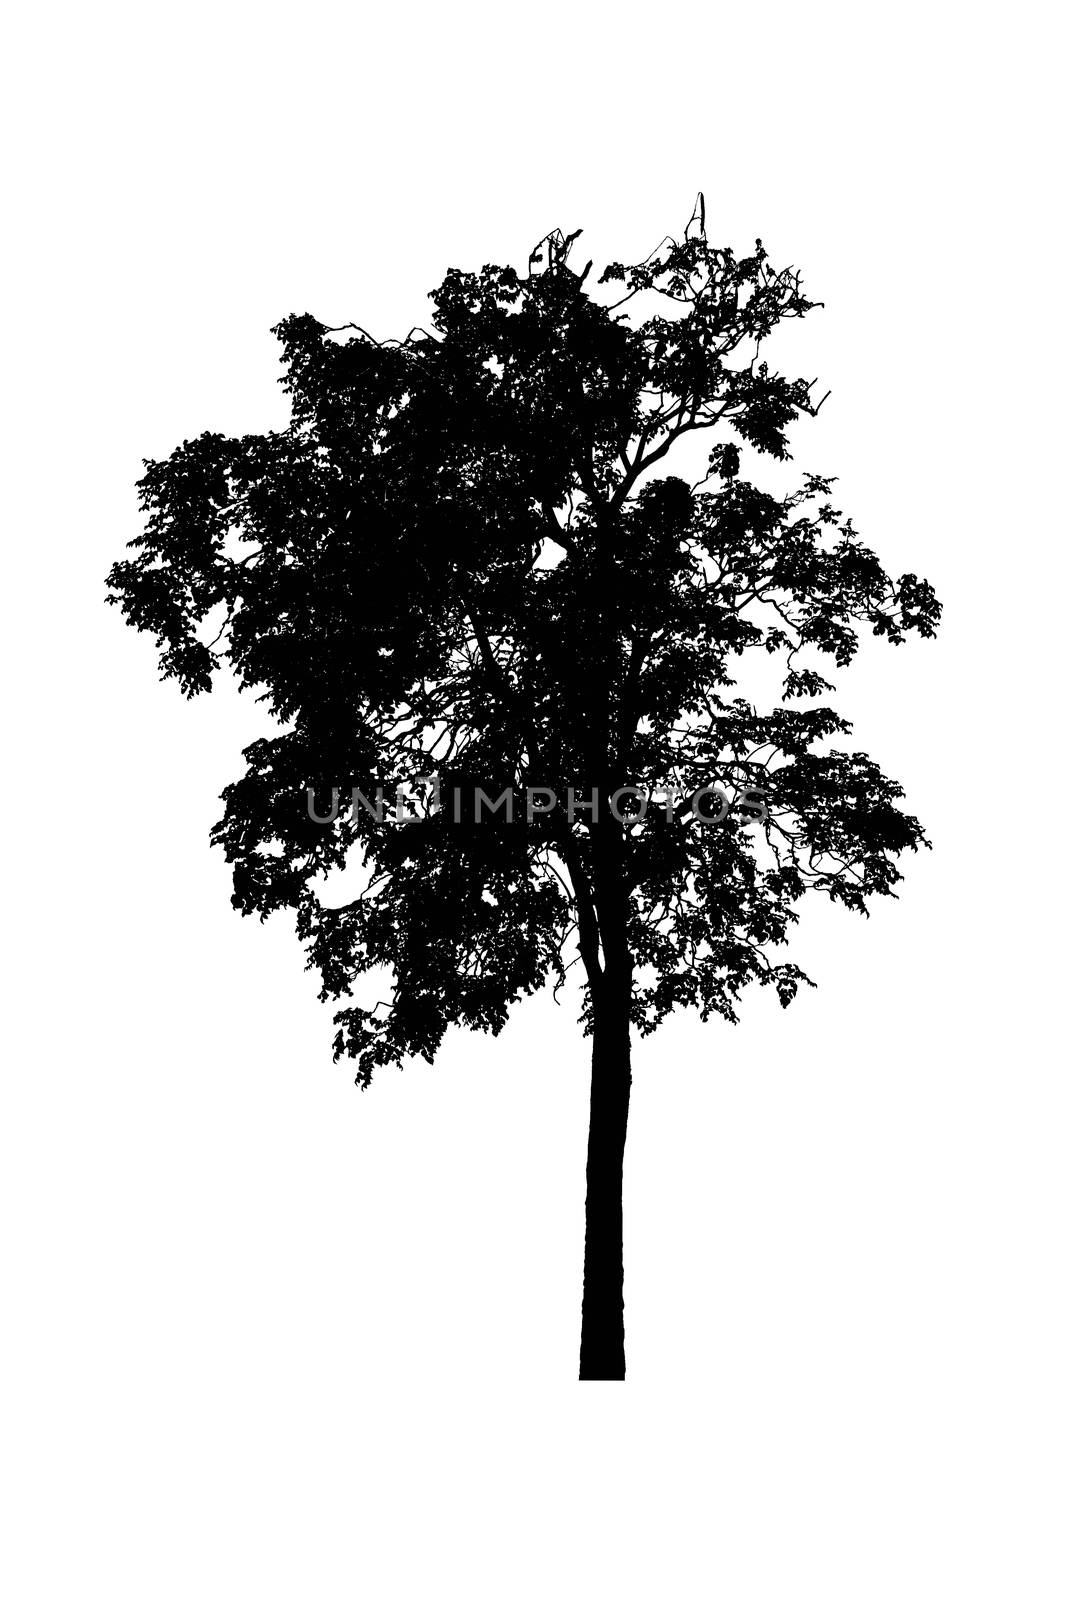 tree silhouettes beautiful isolated on white background by pramot